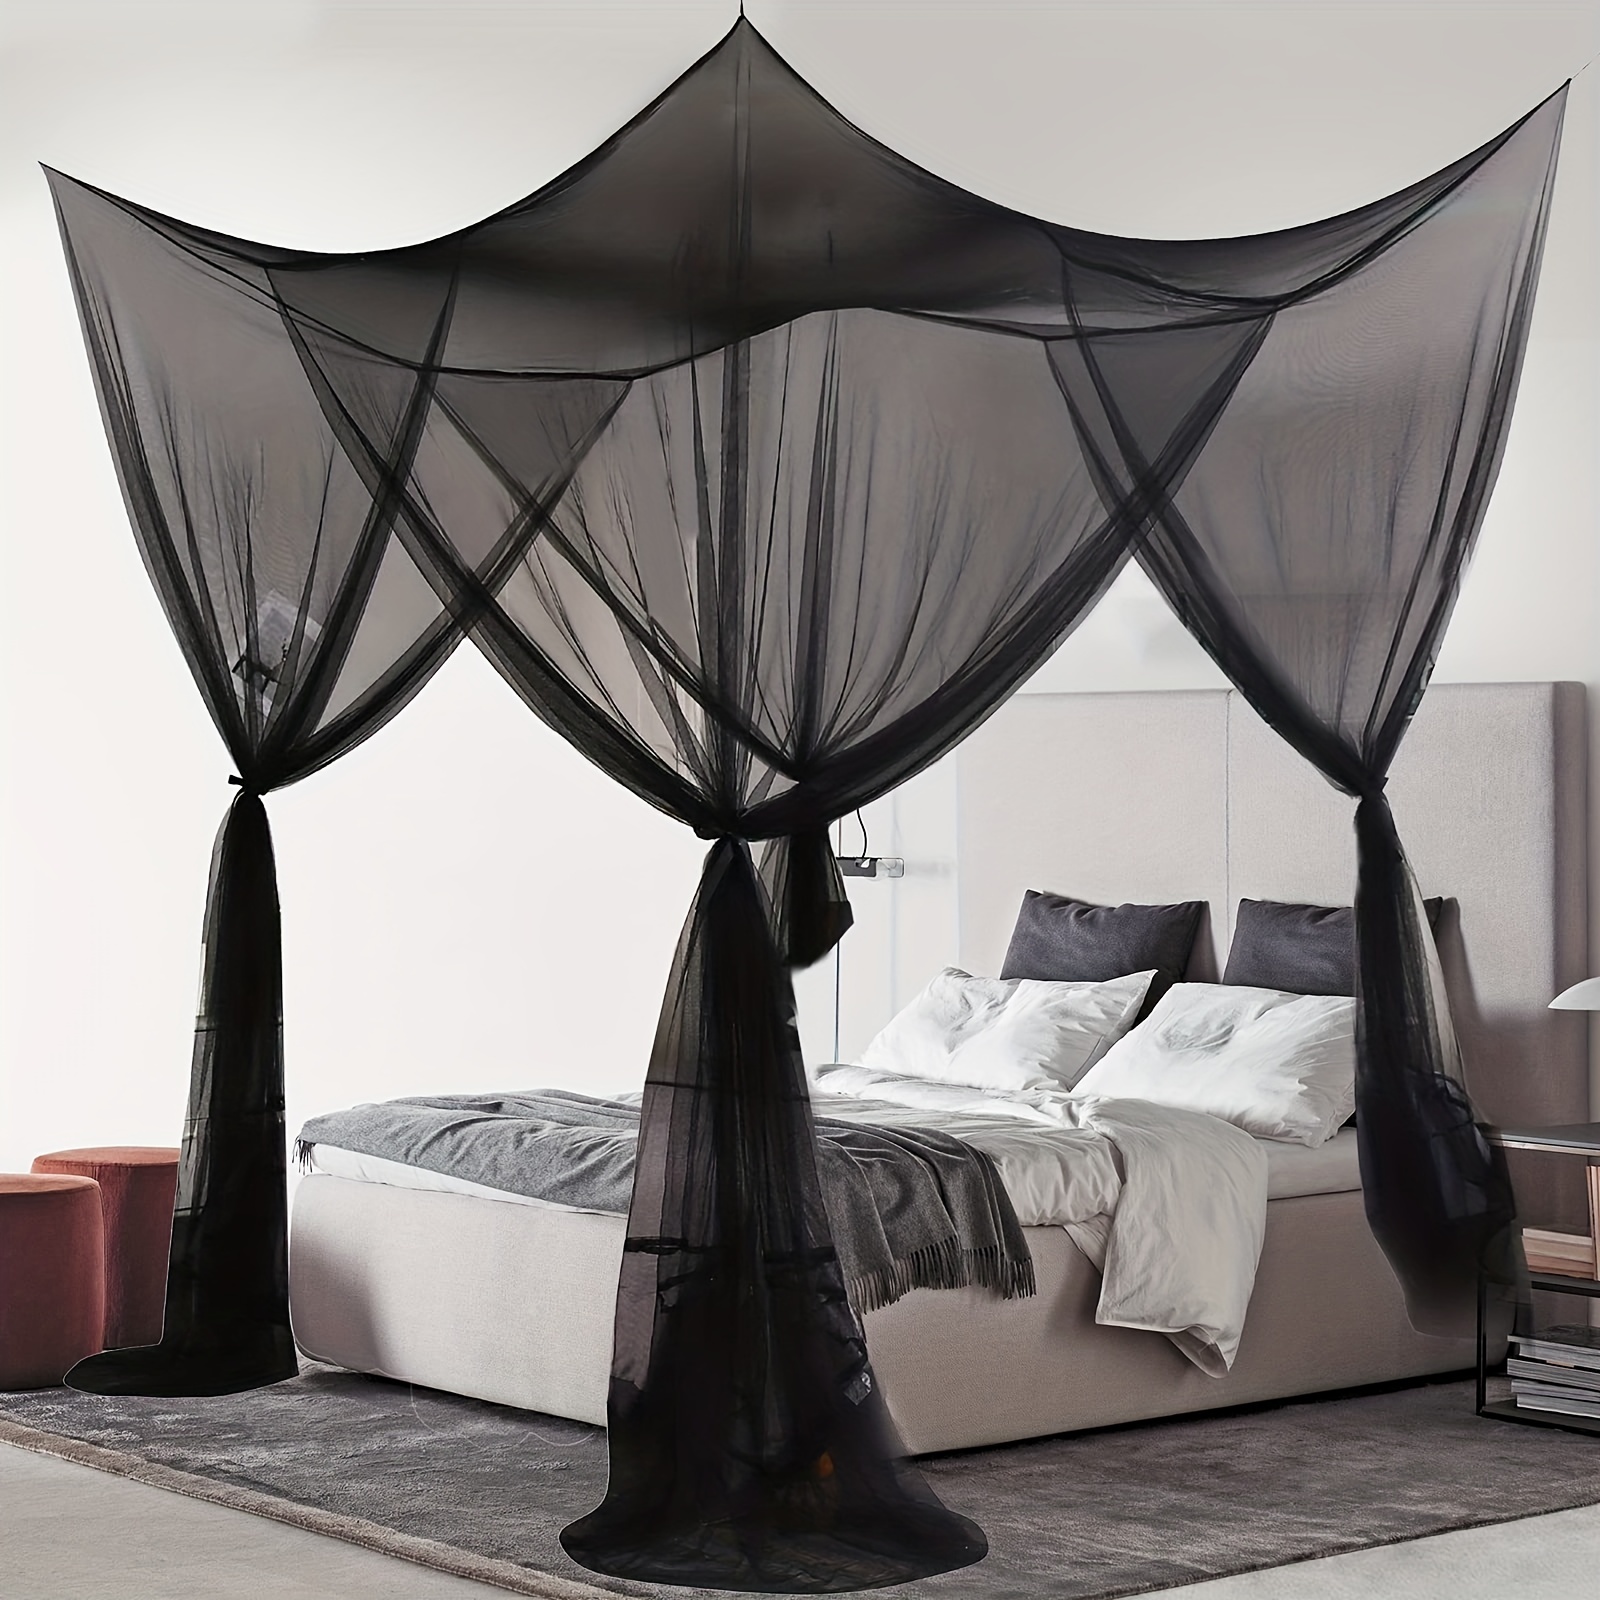 

1pc Mosquito Net For Bed Canopy, 4 Corner Post Curtains Bed Canopy Large Mosquito Netting Bedroom Princess Decoration For Girls & Adults